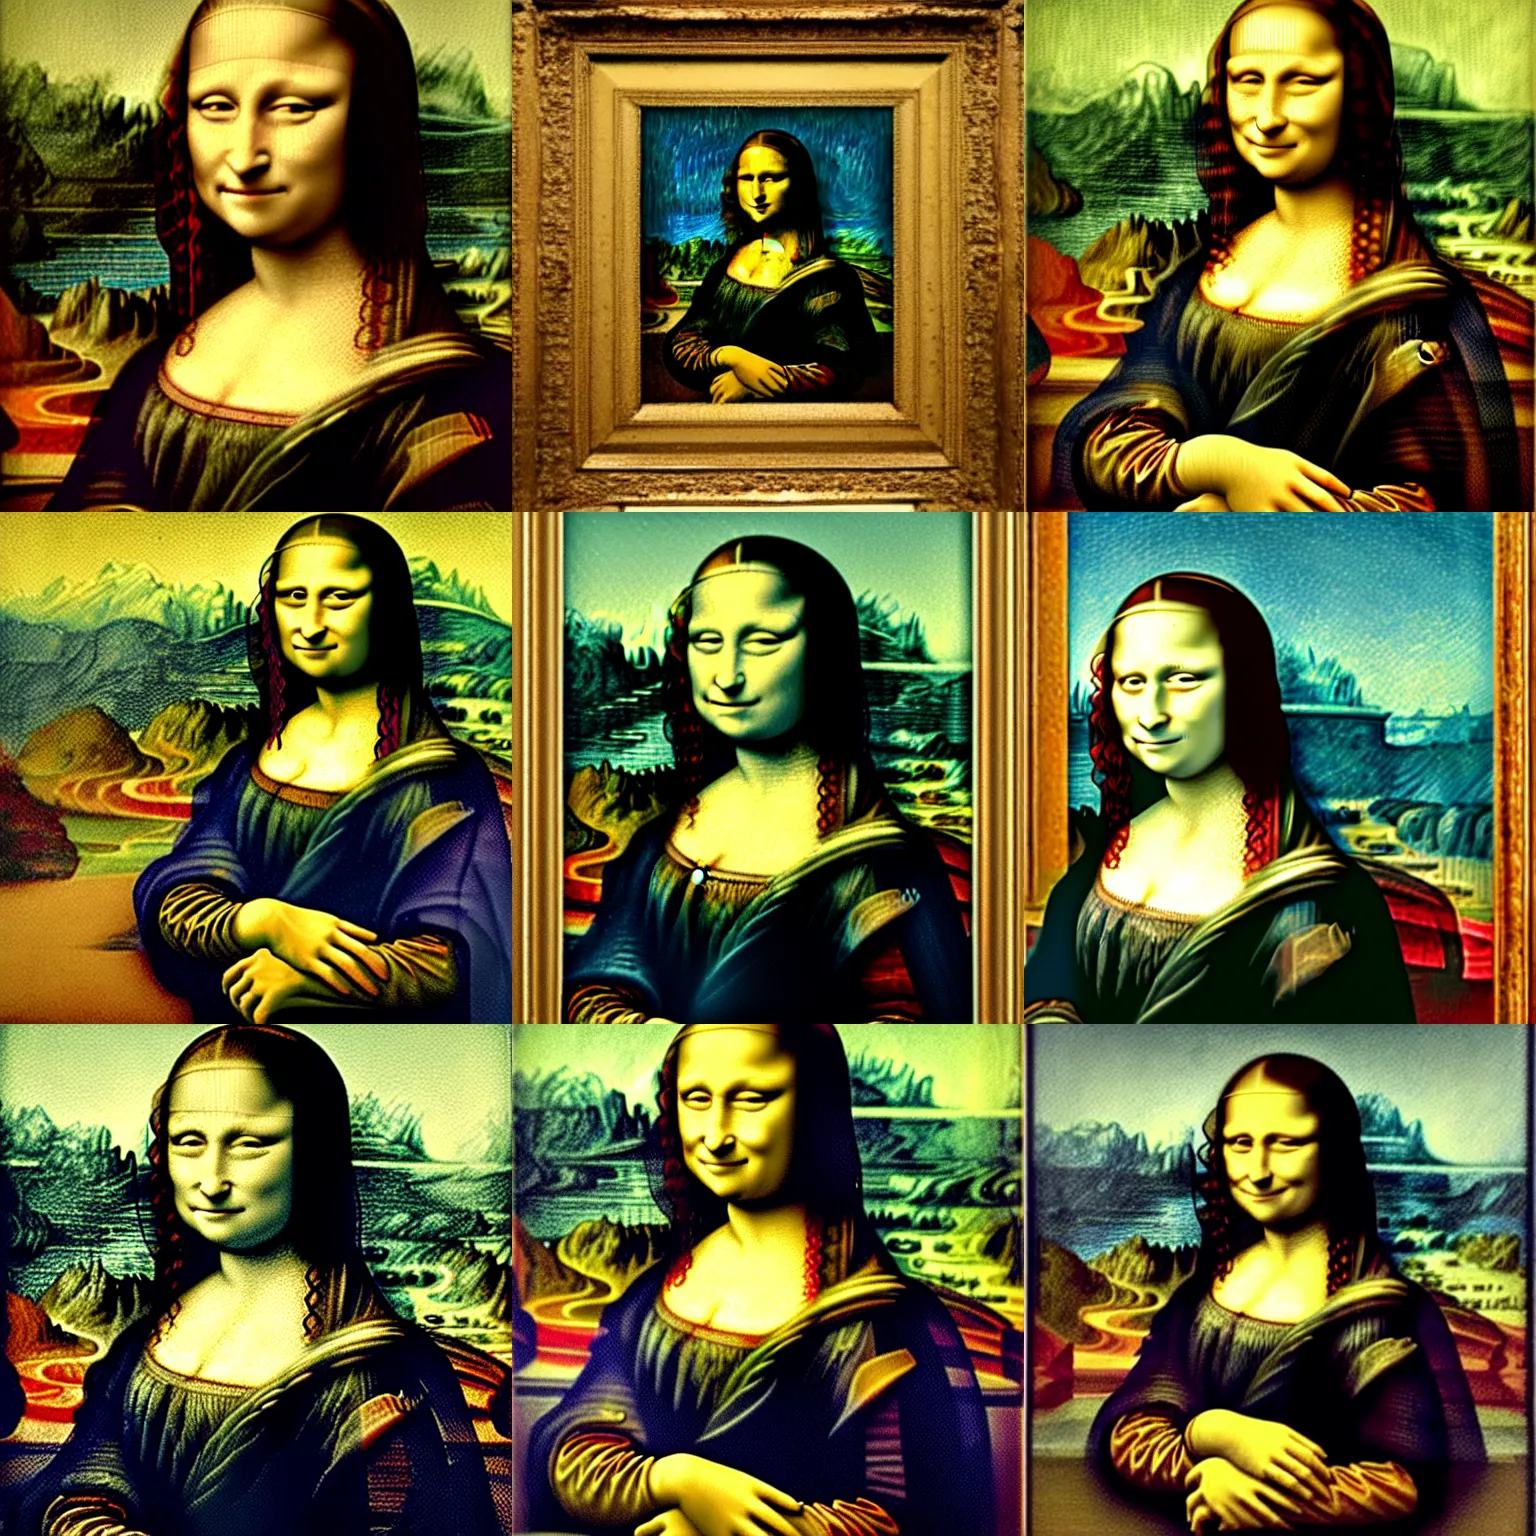 Prompt: The Mona Lisa, but painted by Van Gogh